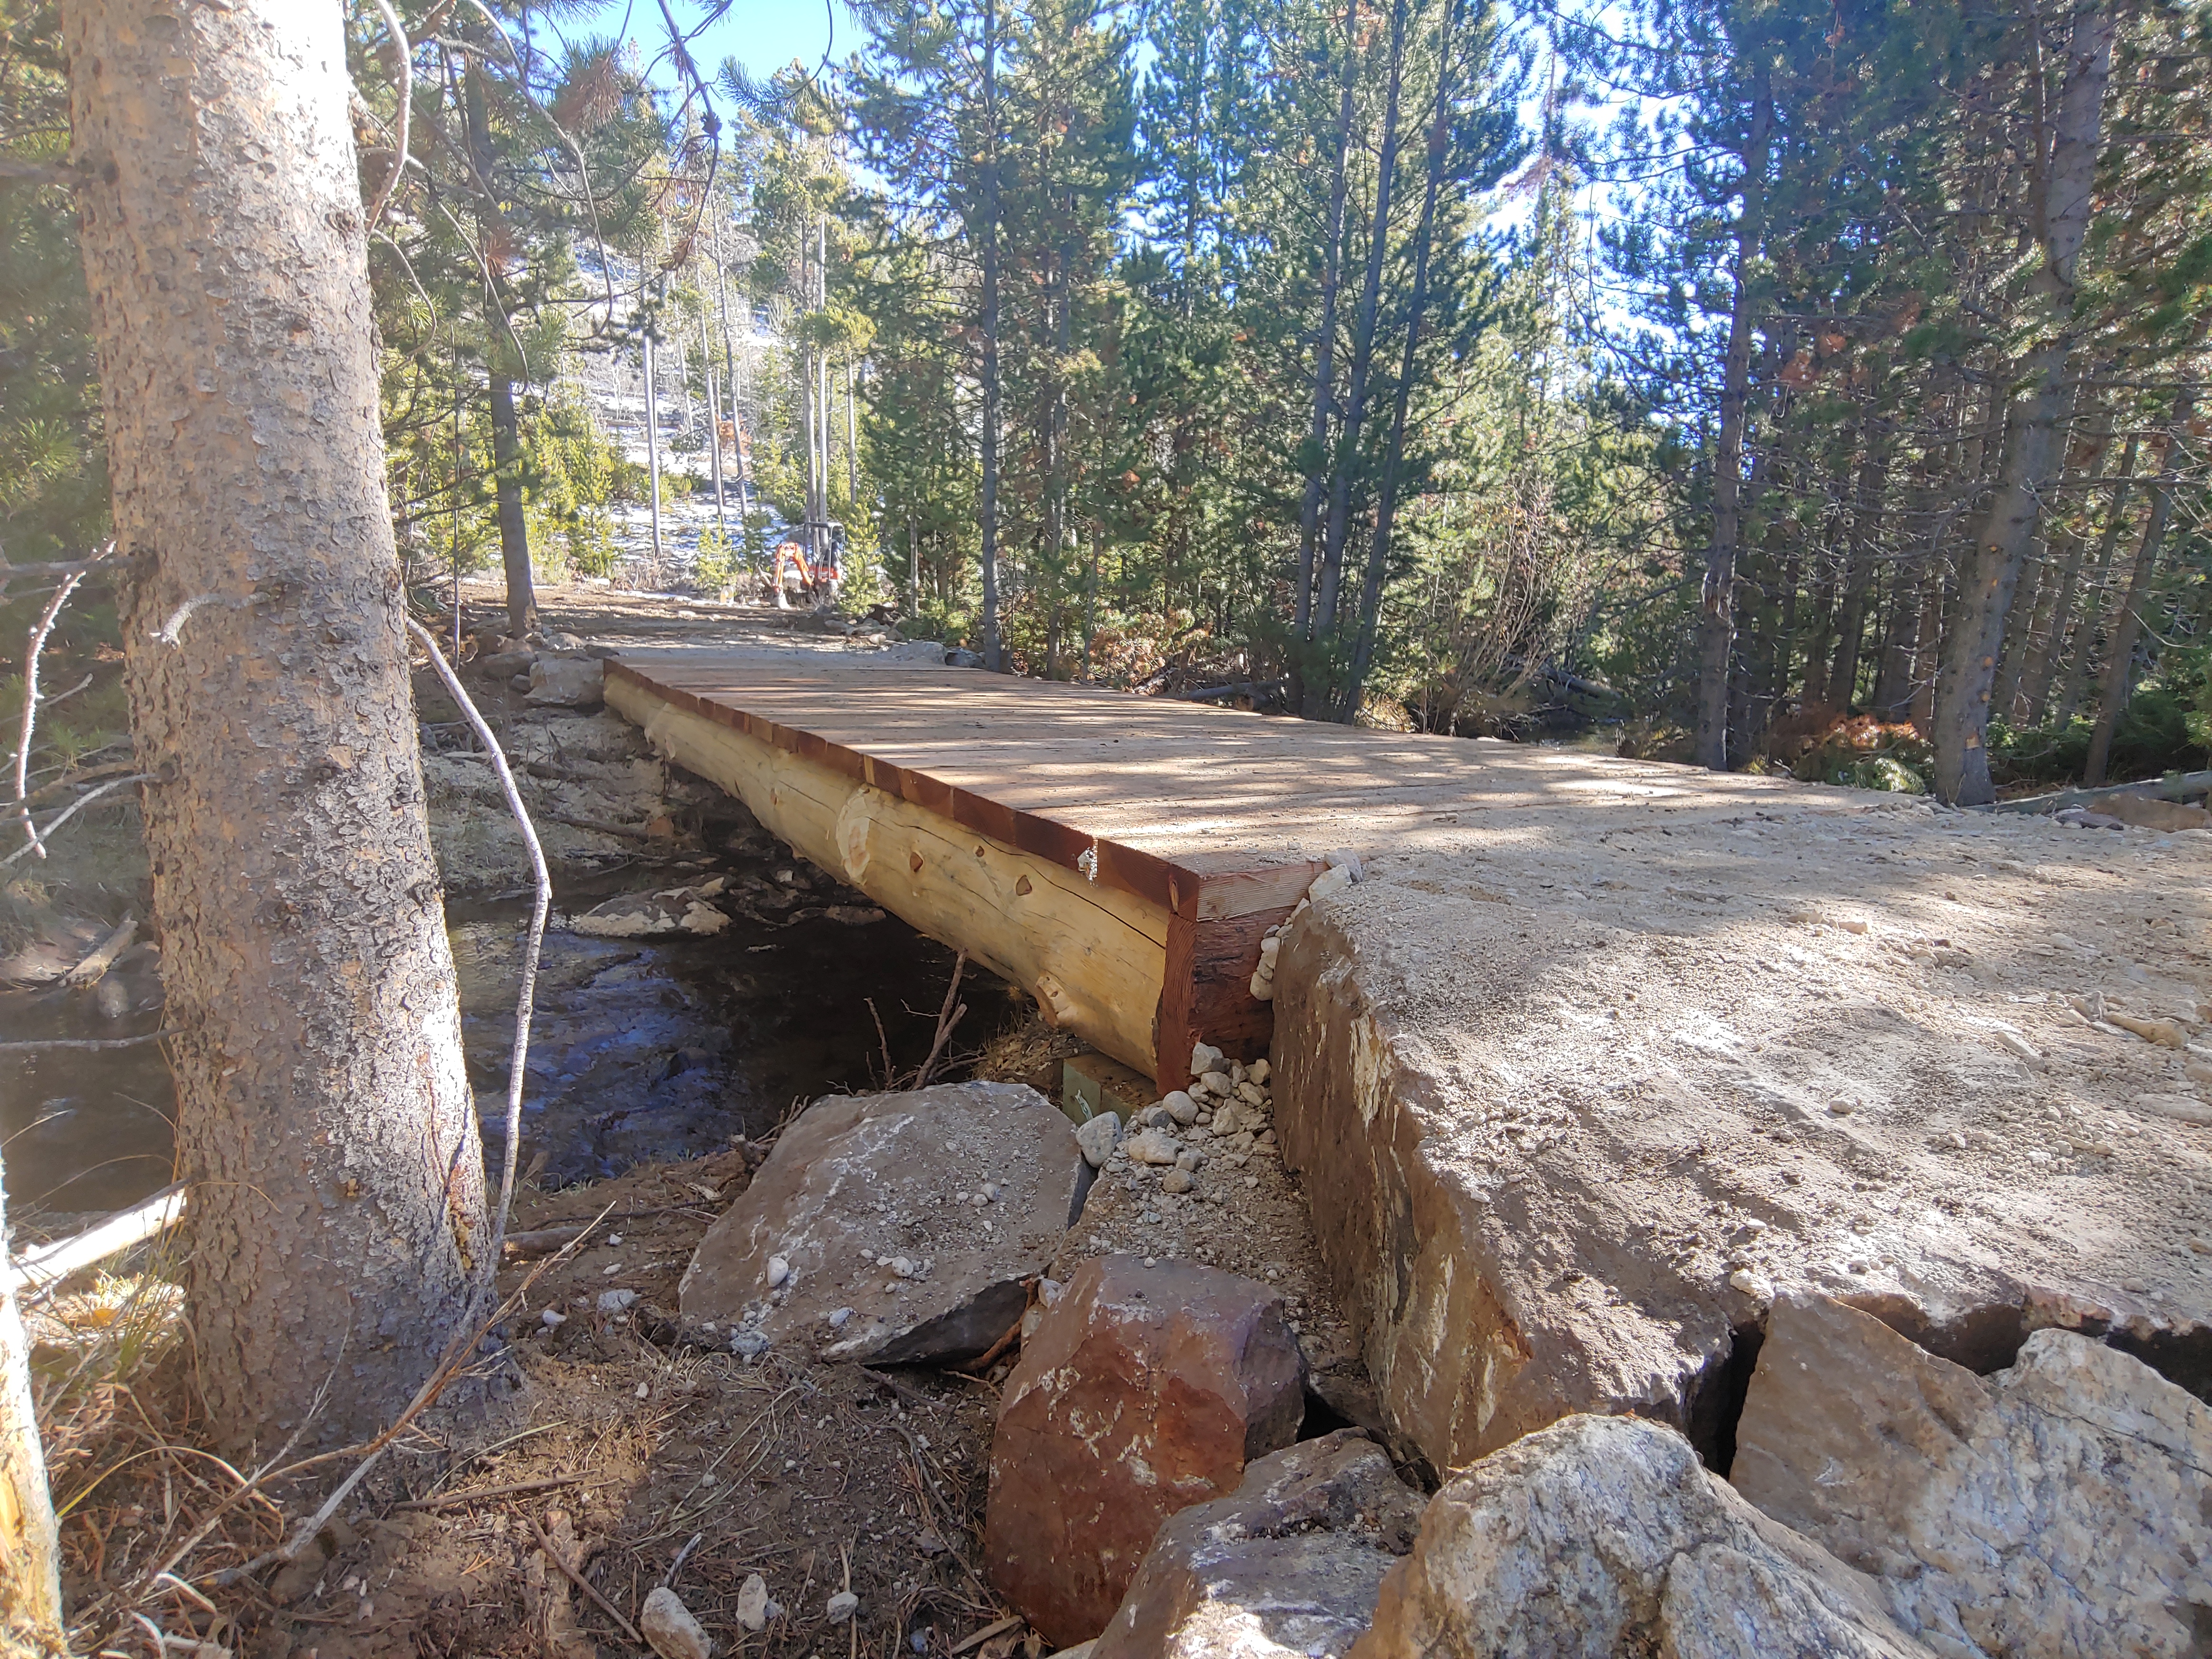 A picture of a wood constructed bridge in a dense forested area.